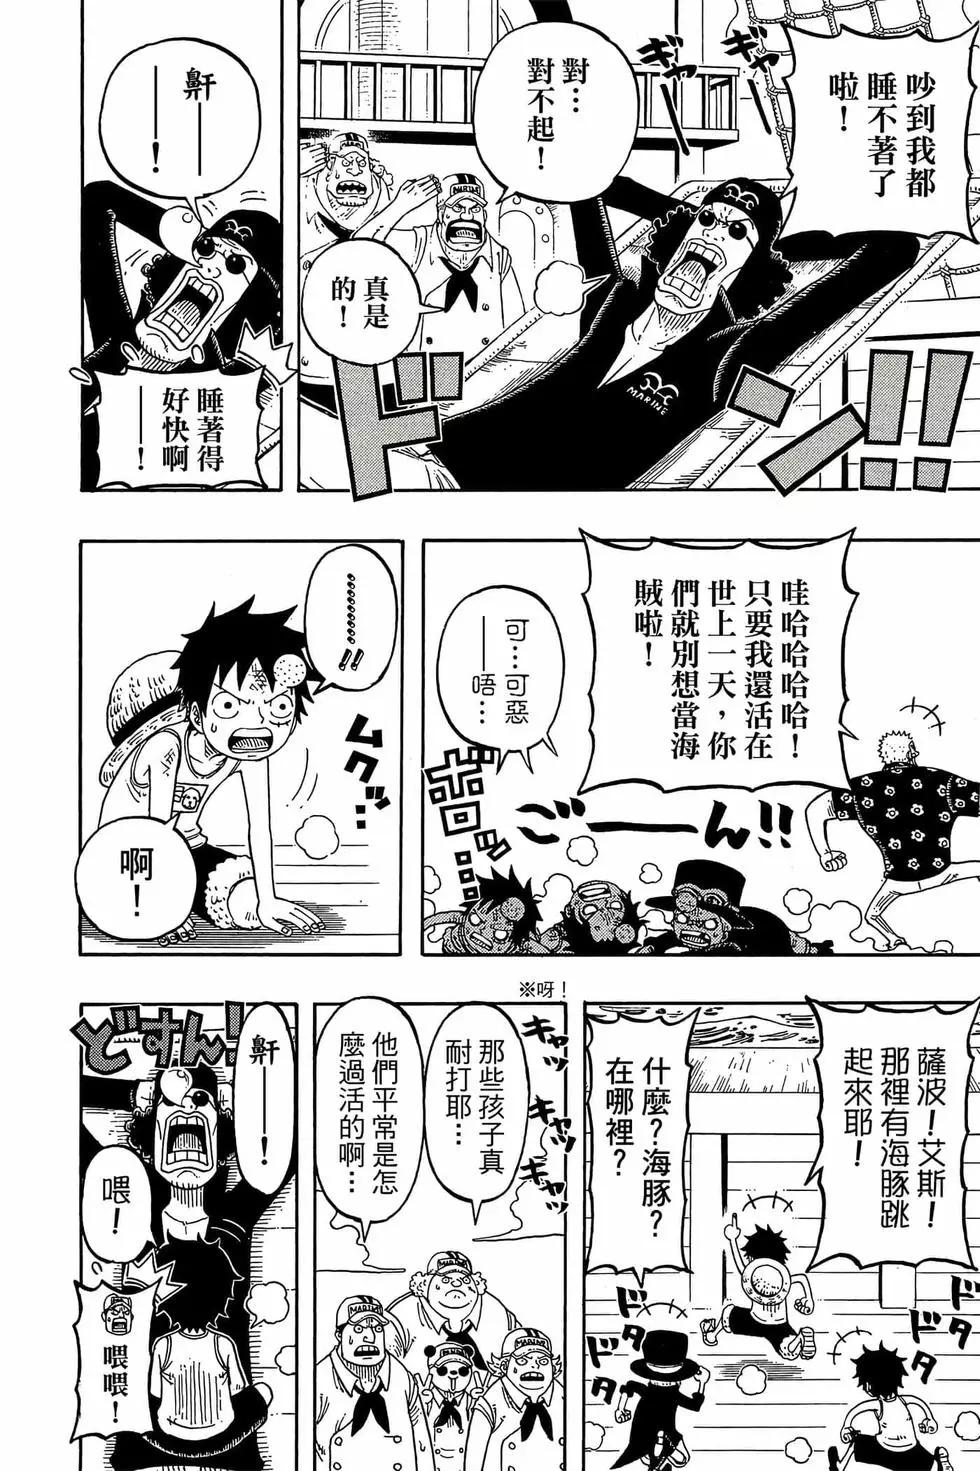 One piece party - 第03卷(2/4) - 1